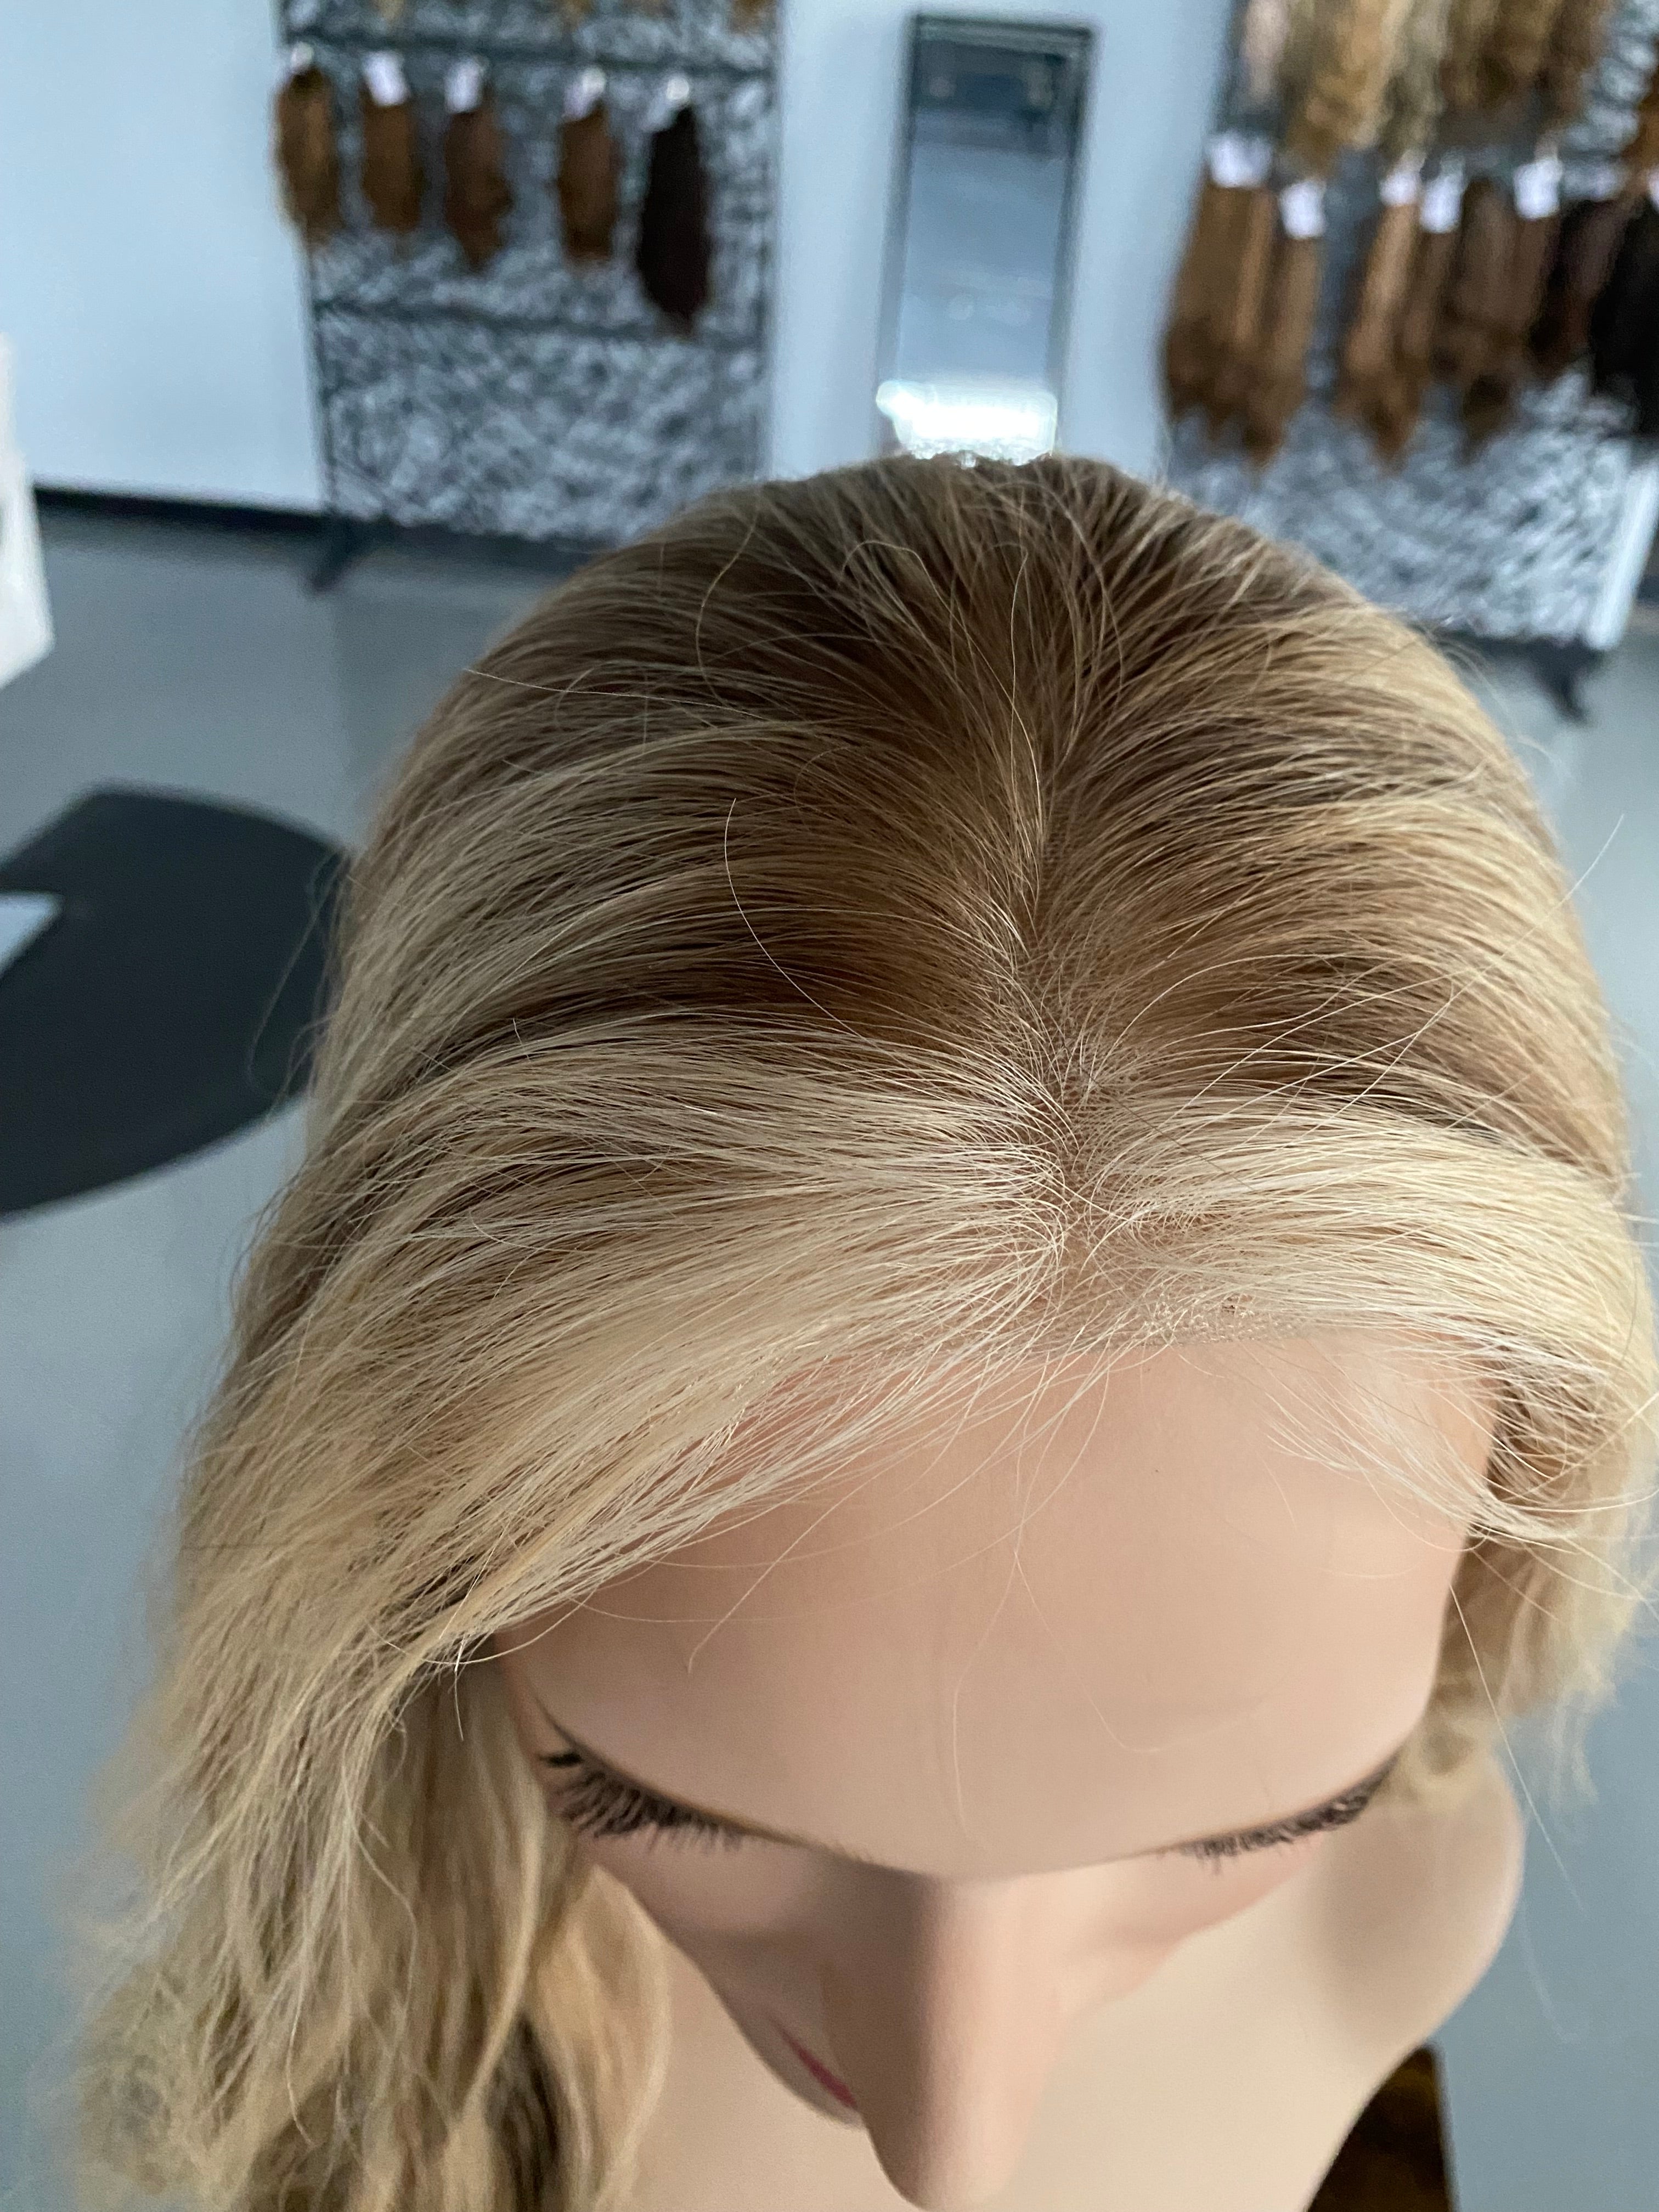 Closed Lace Topper - Warm Level 7 with Golden Blonde Highlights, 8x8, 18-22